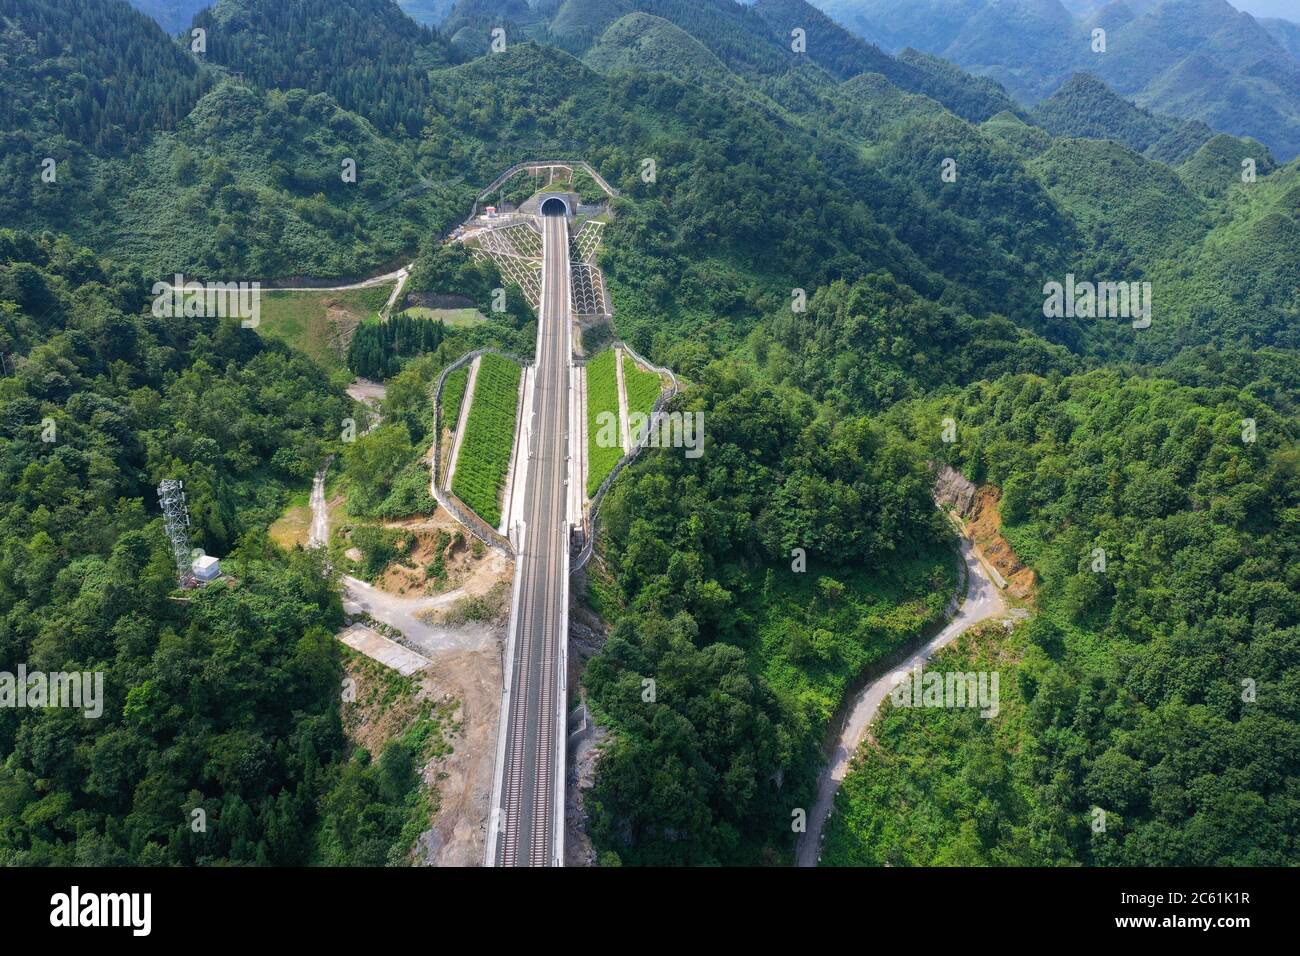 Liupanshui. 6th July, 2020. Aerial photo taken on July 6, 2020 shows a railway bridge along the Anshun-Liupanshui railway in southwest China's Guizhou Province. The Anshun-Liupanshui intercity railway, with a designed speed of 250 km per hour, is being prepared for opening. The railway will shorten the travel time between Guiyang and Liupanshui from the current 3.5 hours to about 1 hour, and Liupanshui City will be fully connected with the national high-speed rail network. Credit: Liu Xu/Xinhua/Alamy Live News Stock Photo